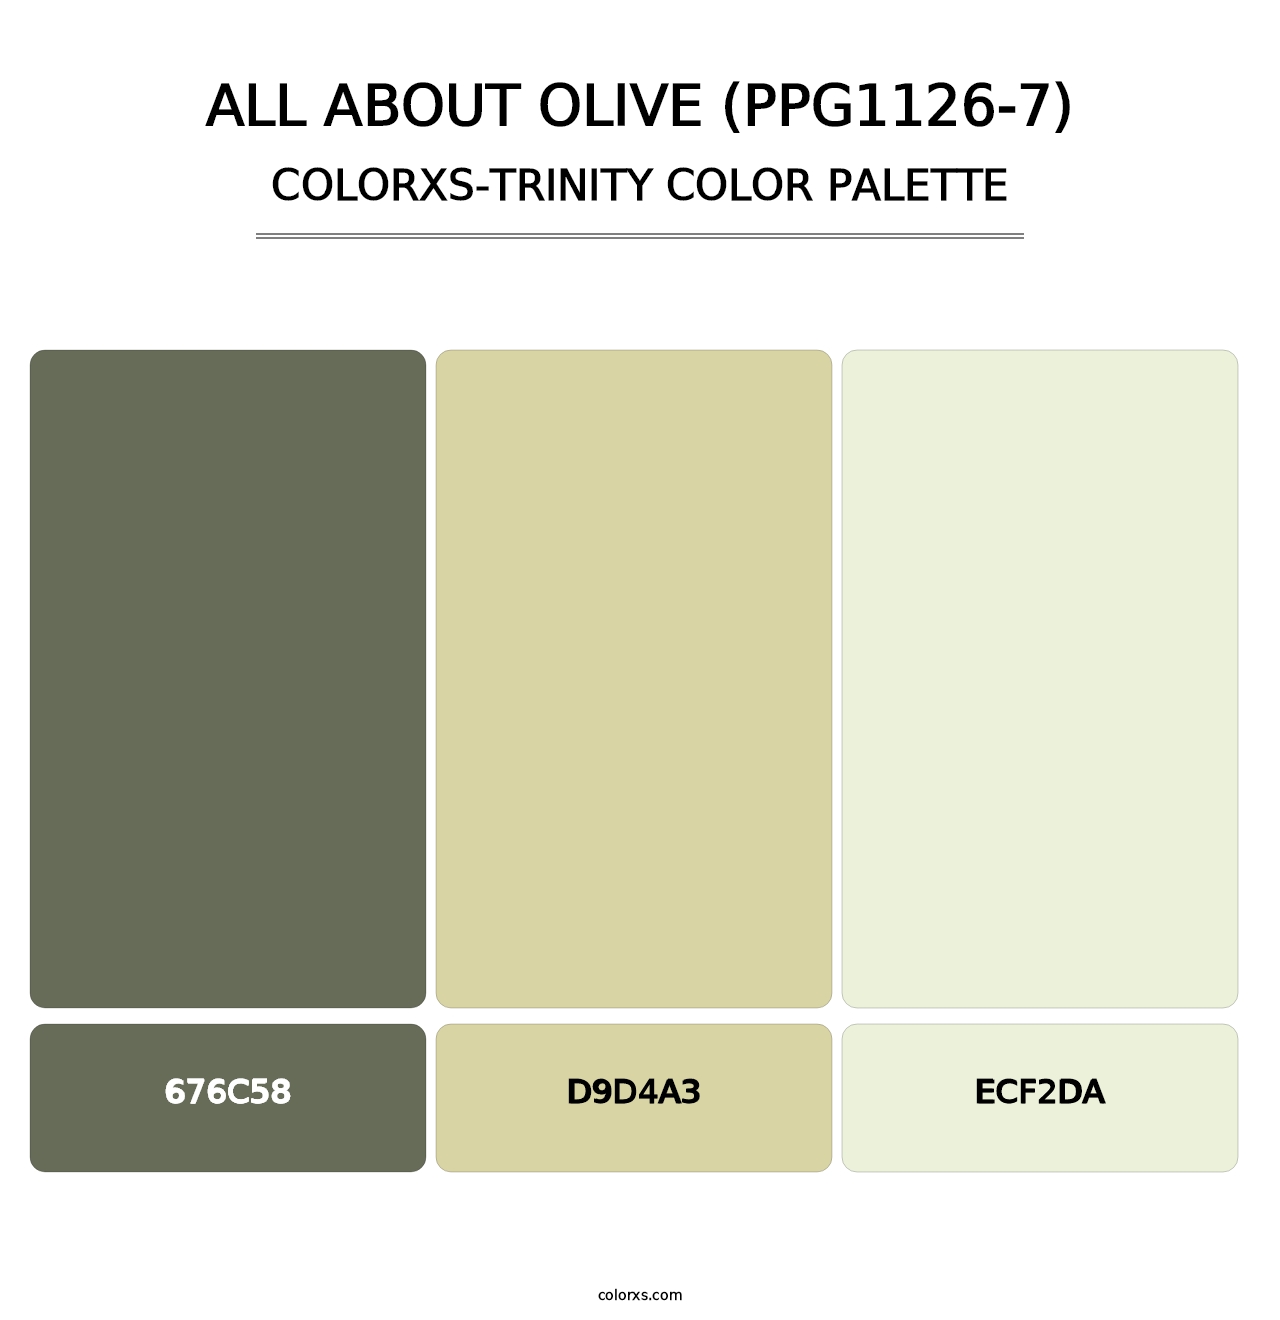 All About Olive (PPG1126-7) - Colorxs Trinity Palette